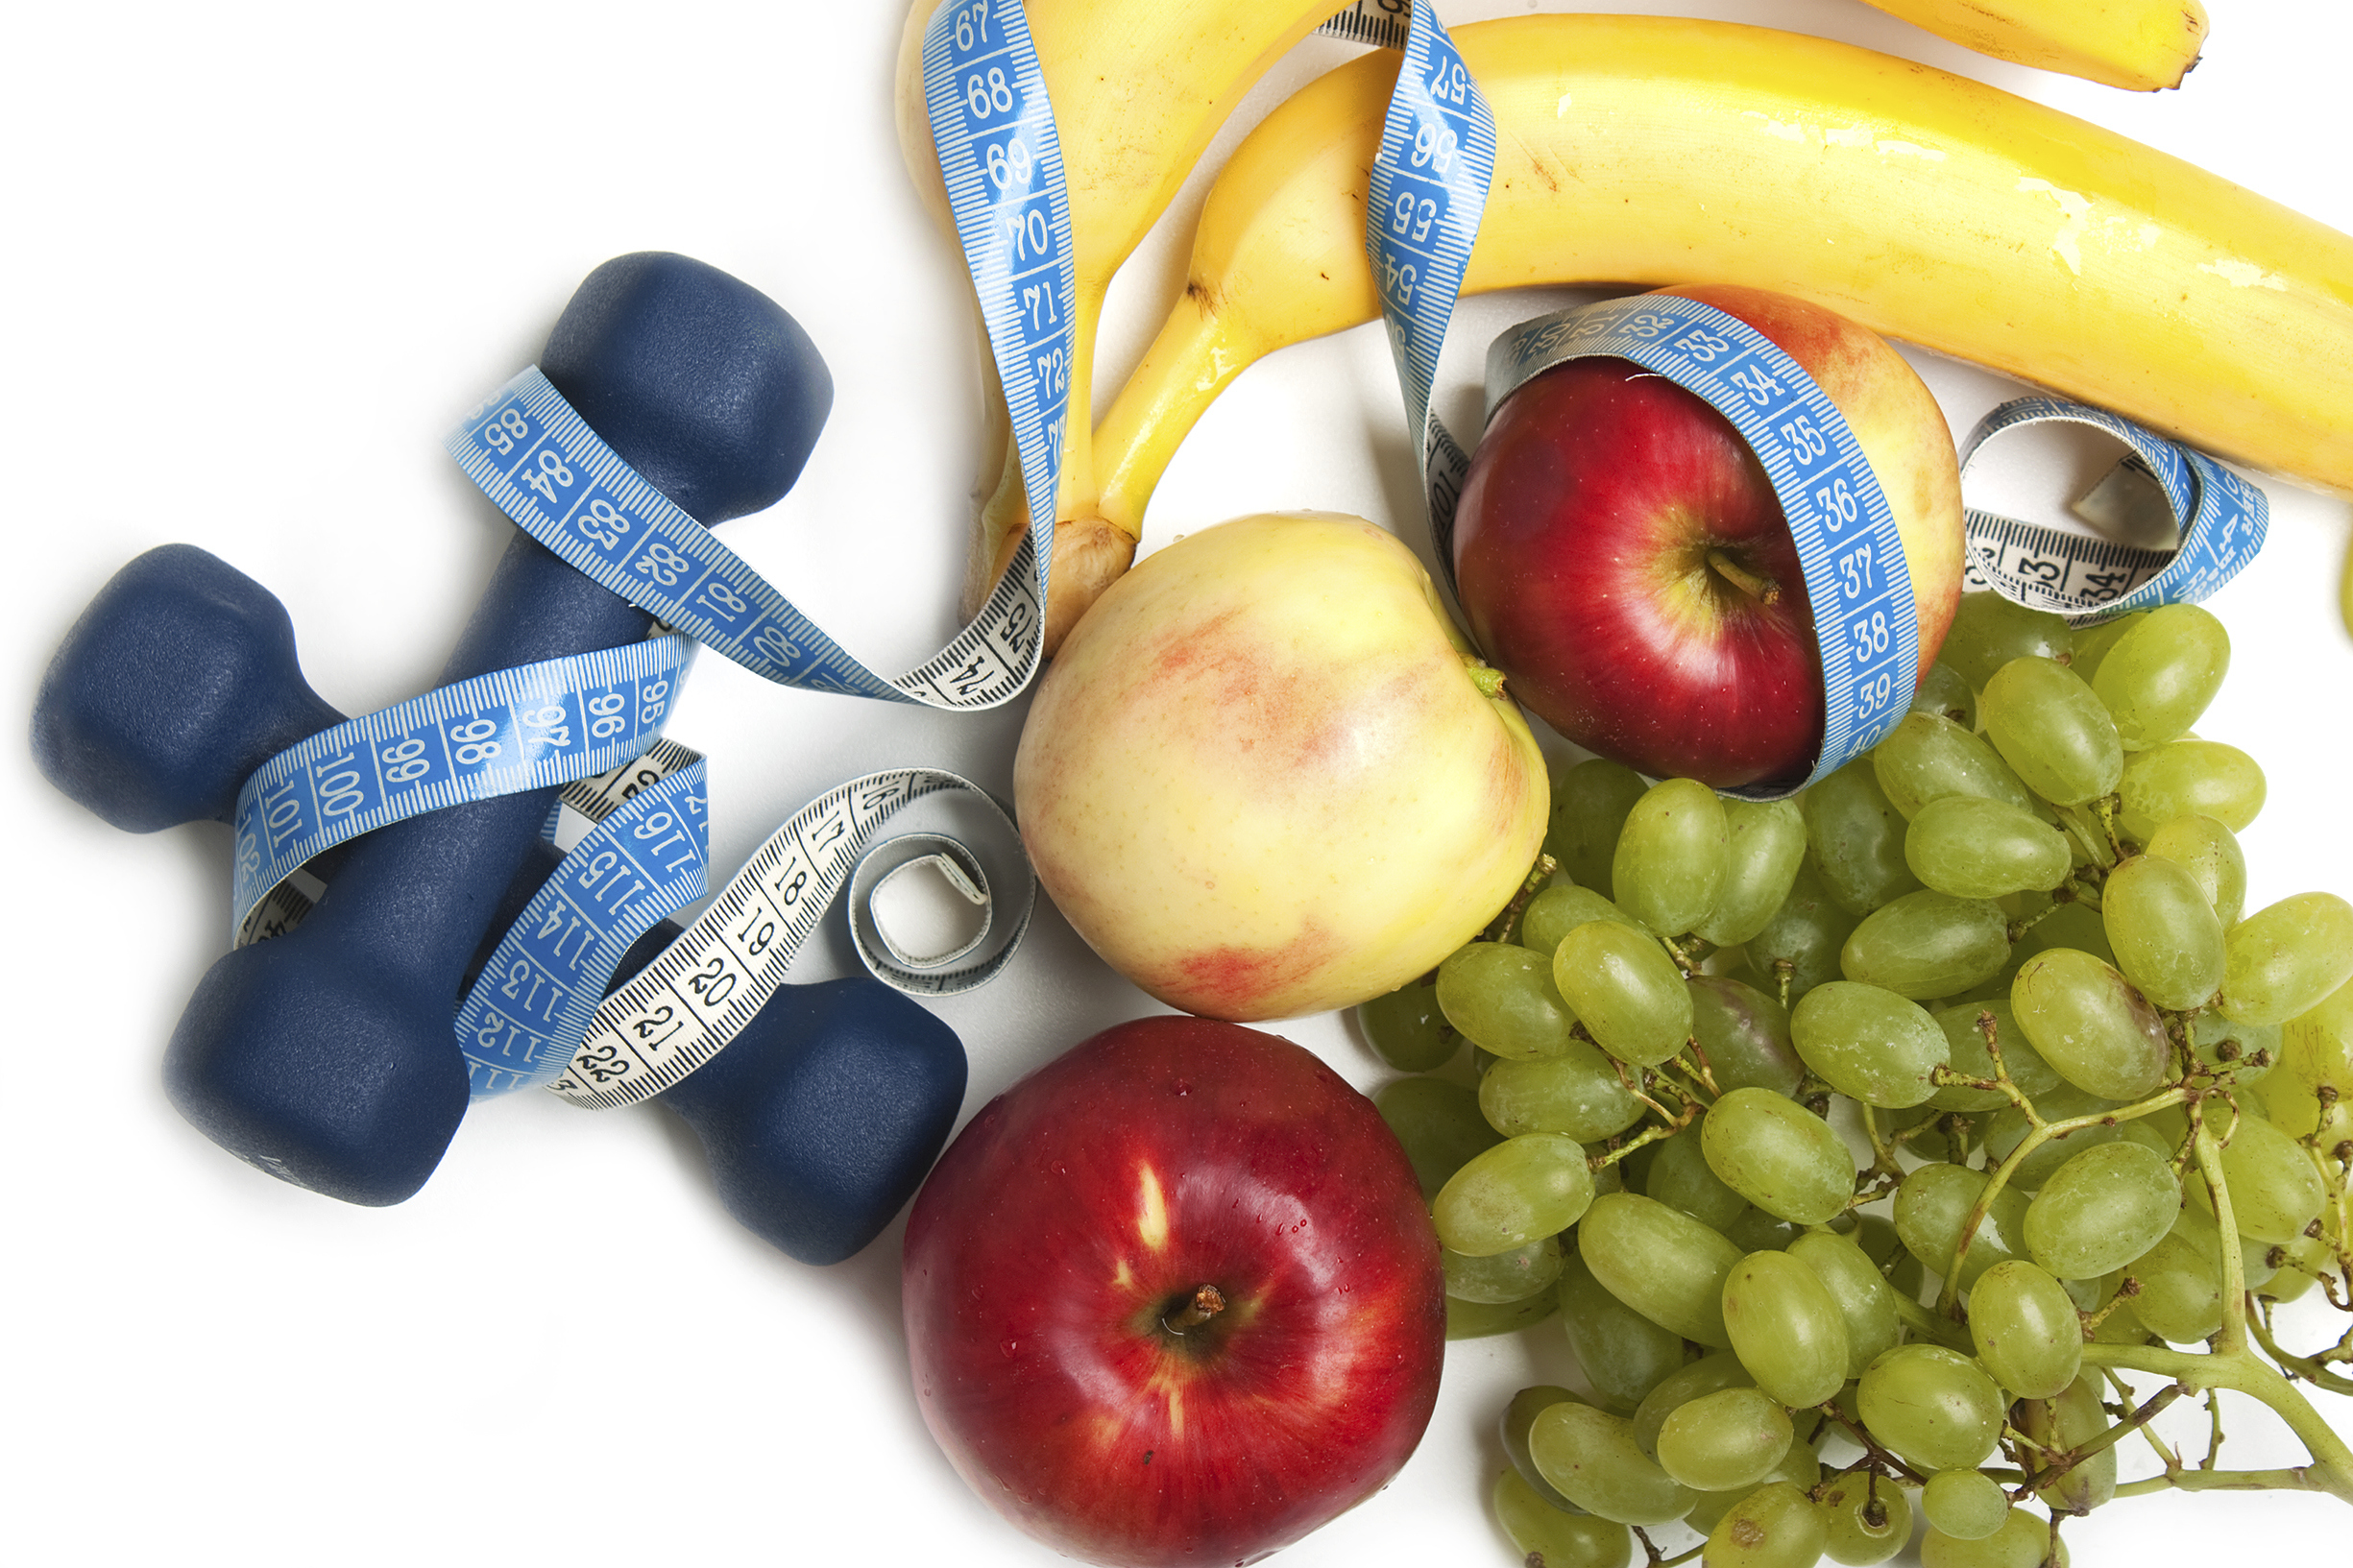 Healthy lifestyle - fruit food, sport exercising